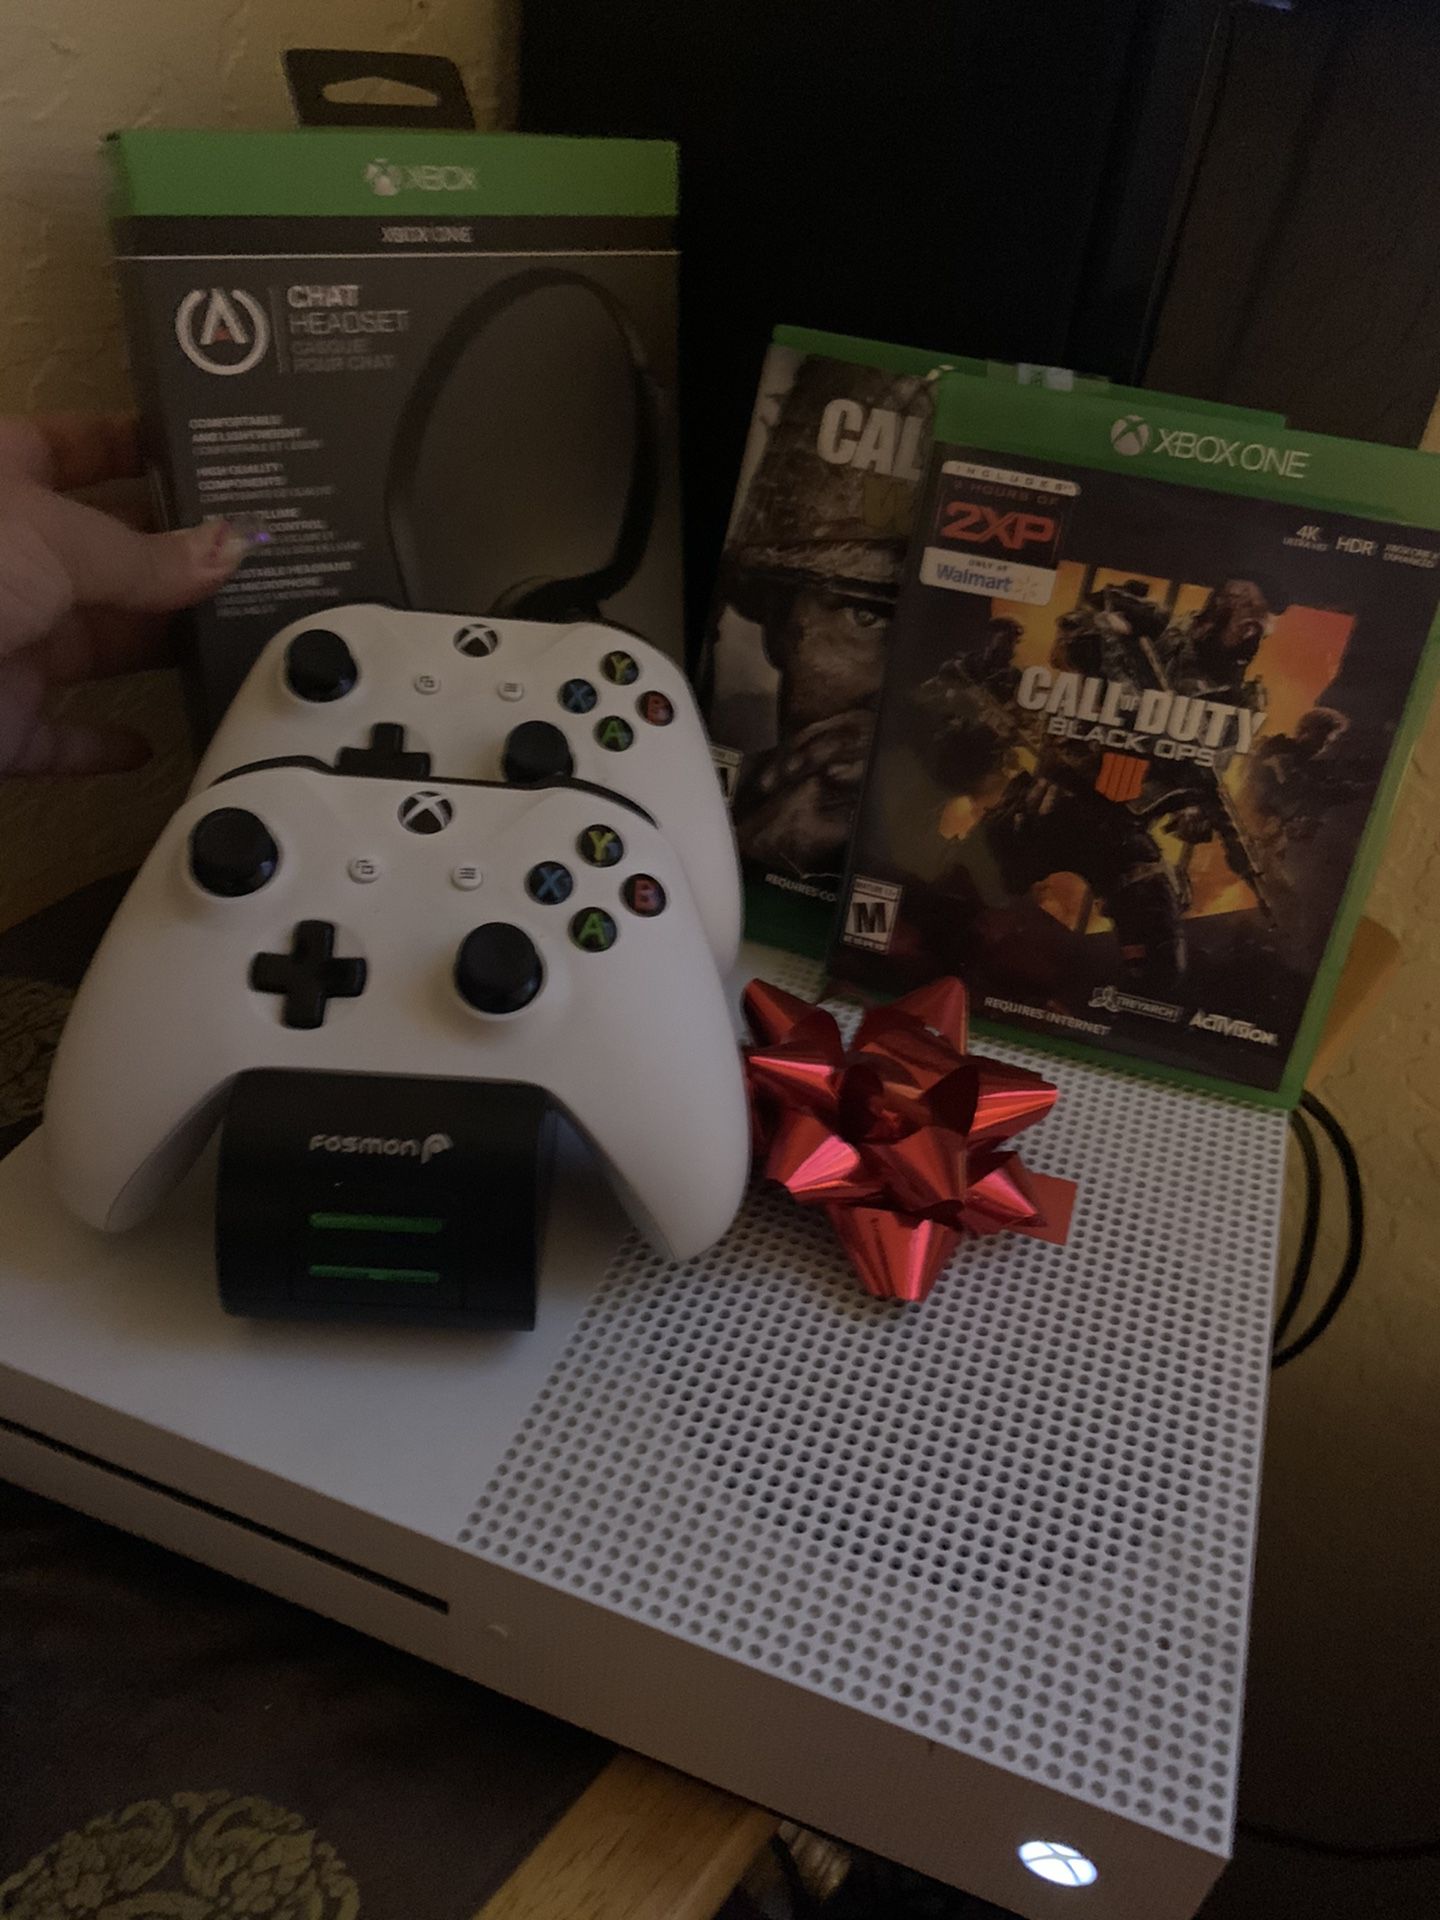 LOOK HERE!! XBOX ONE 500 GB - RARELY USED (ADULT FEMALE OWNED)